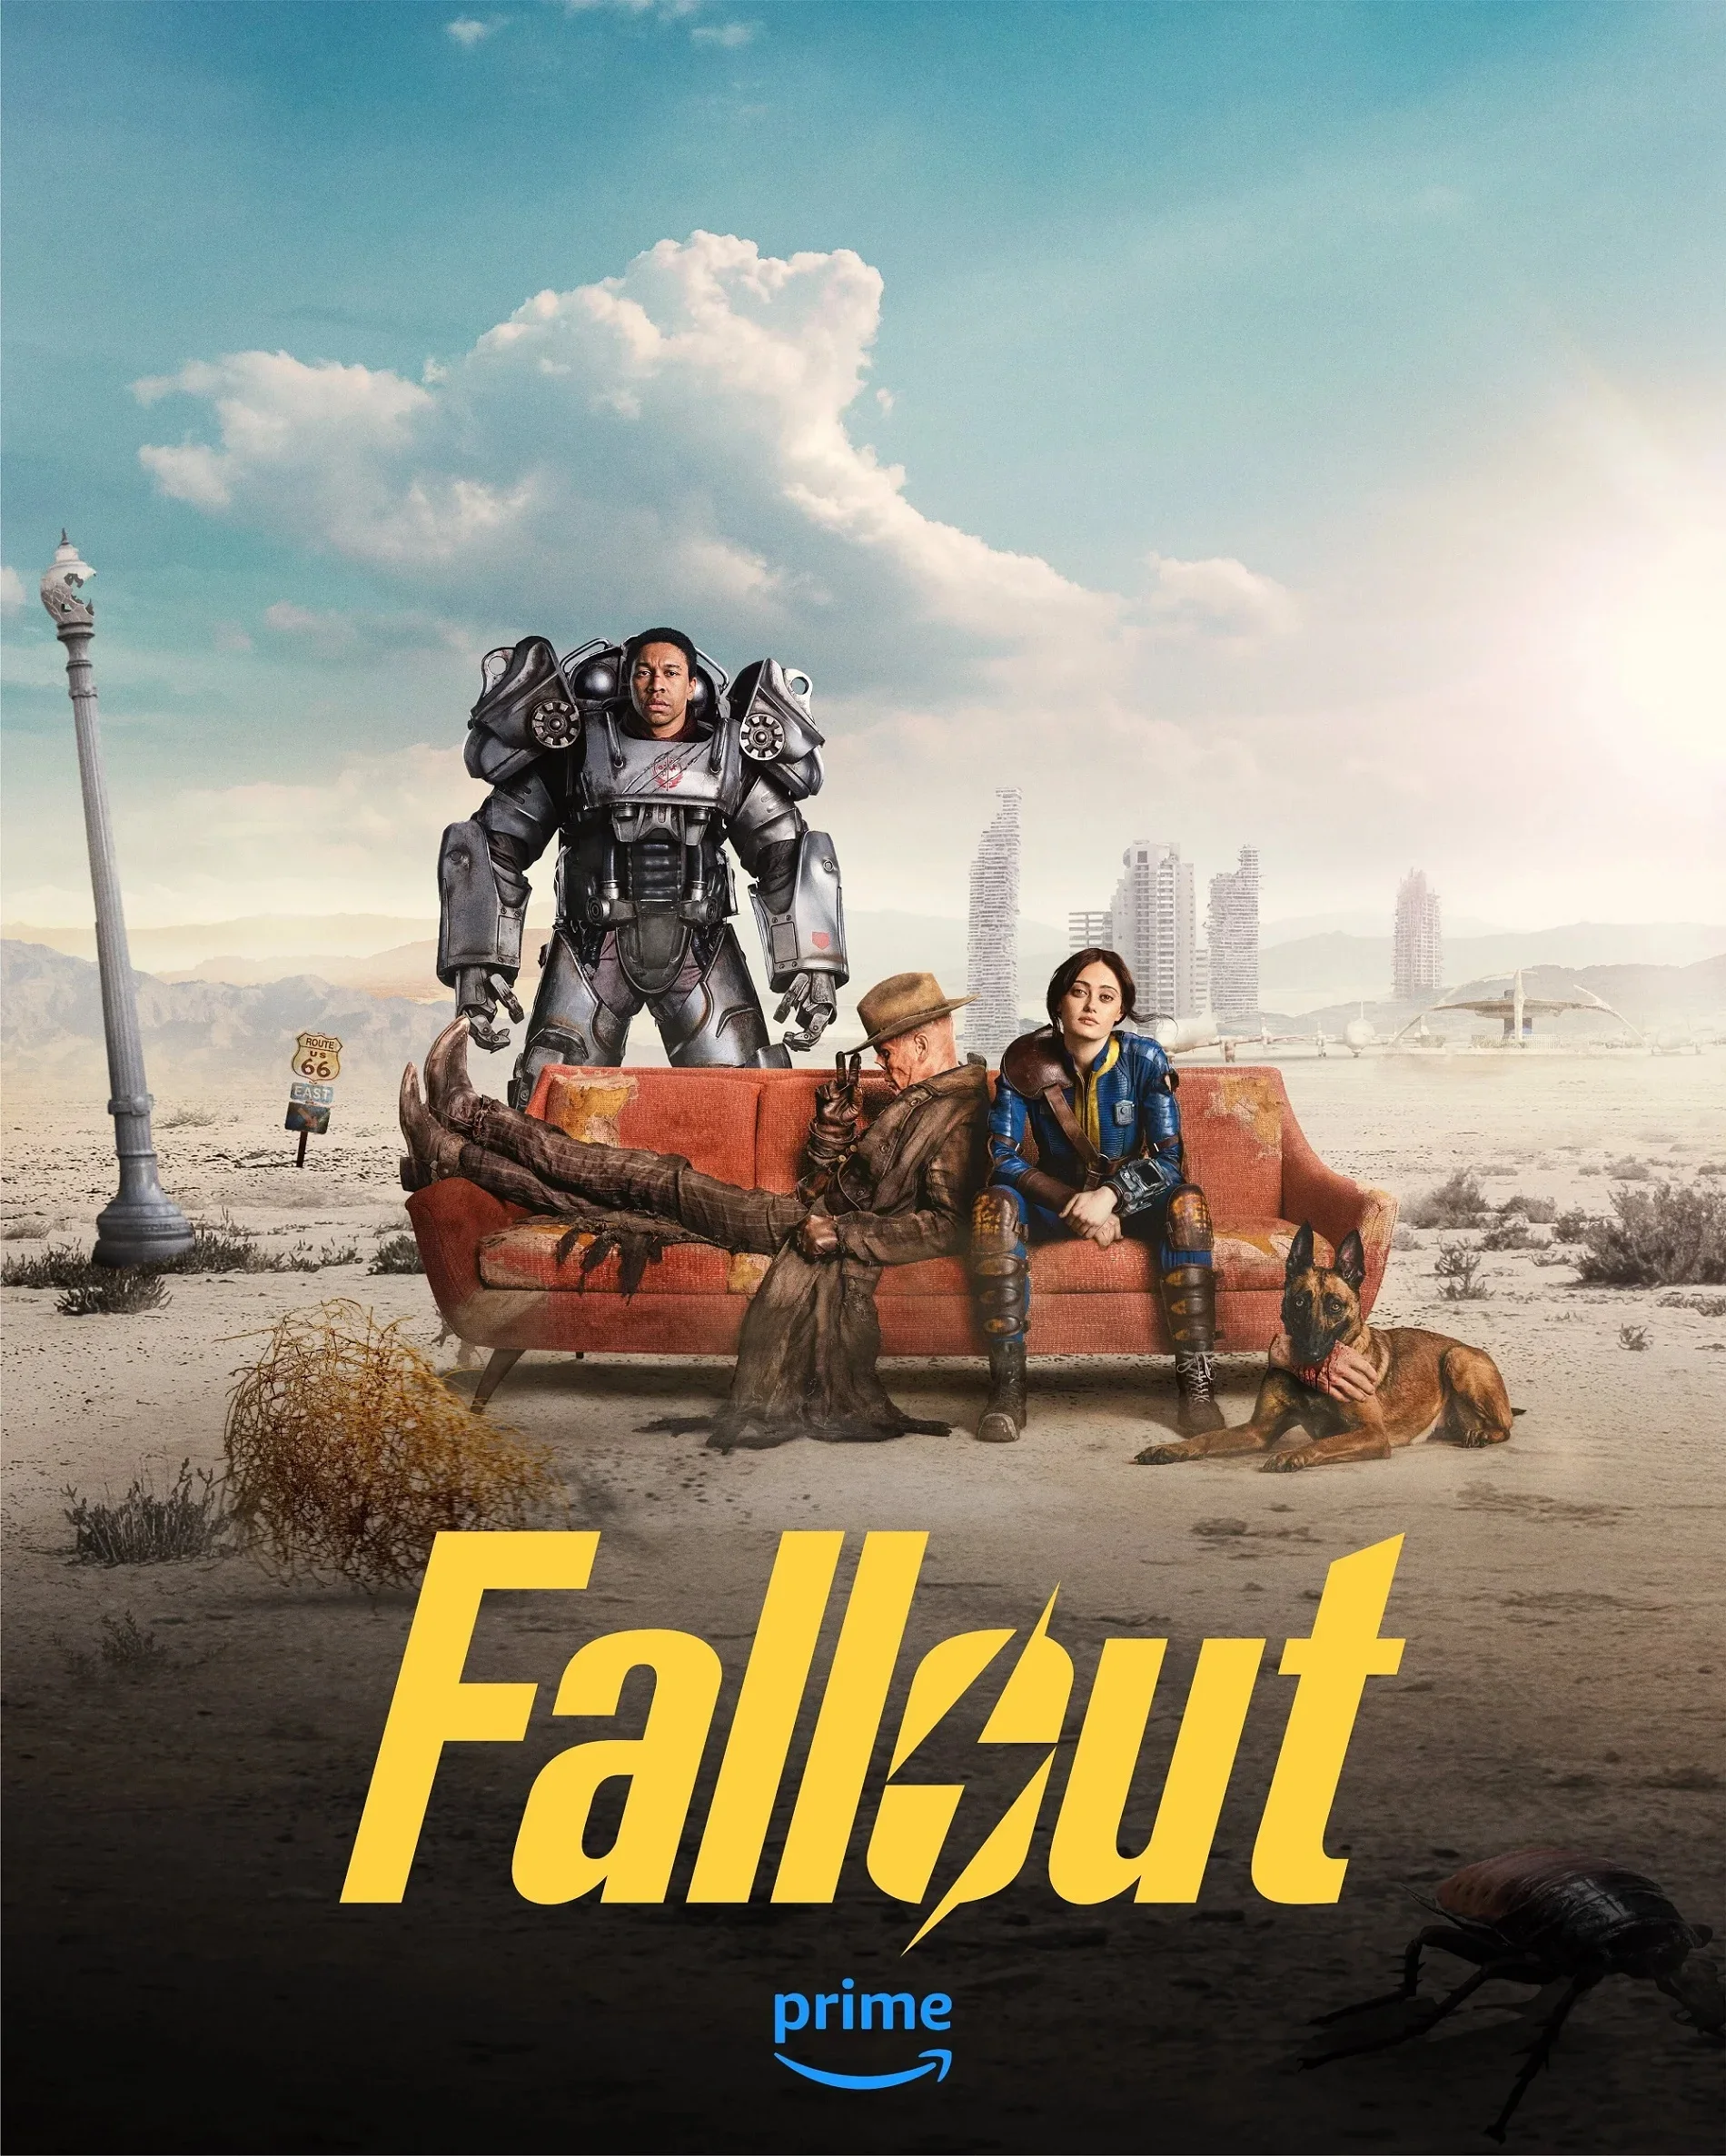 The Fallout series has officially been renewed for a second season.